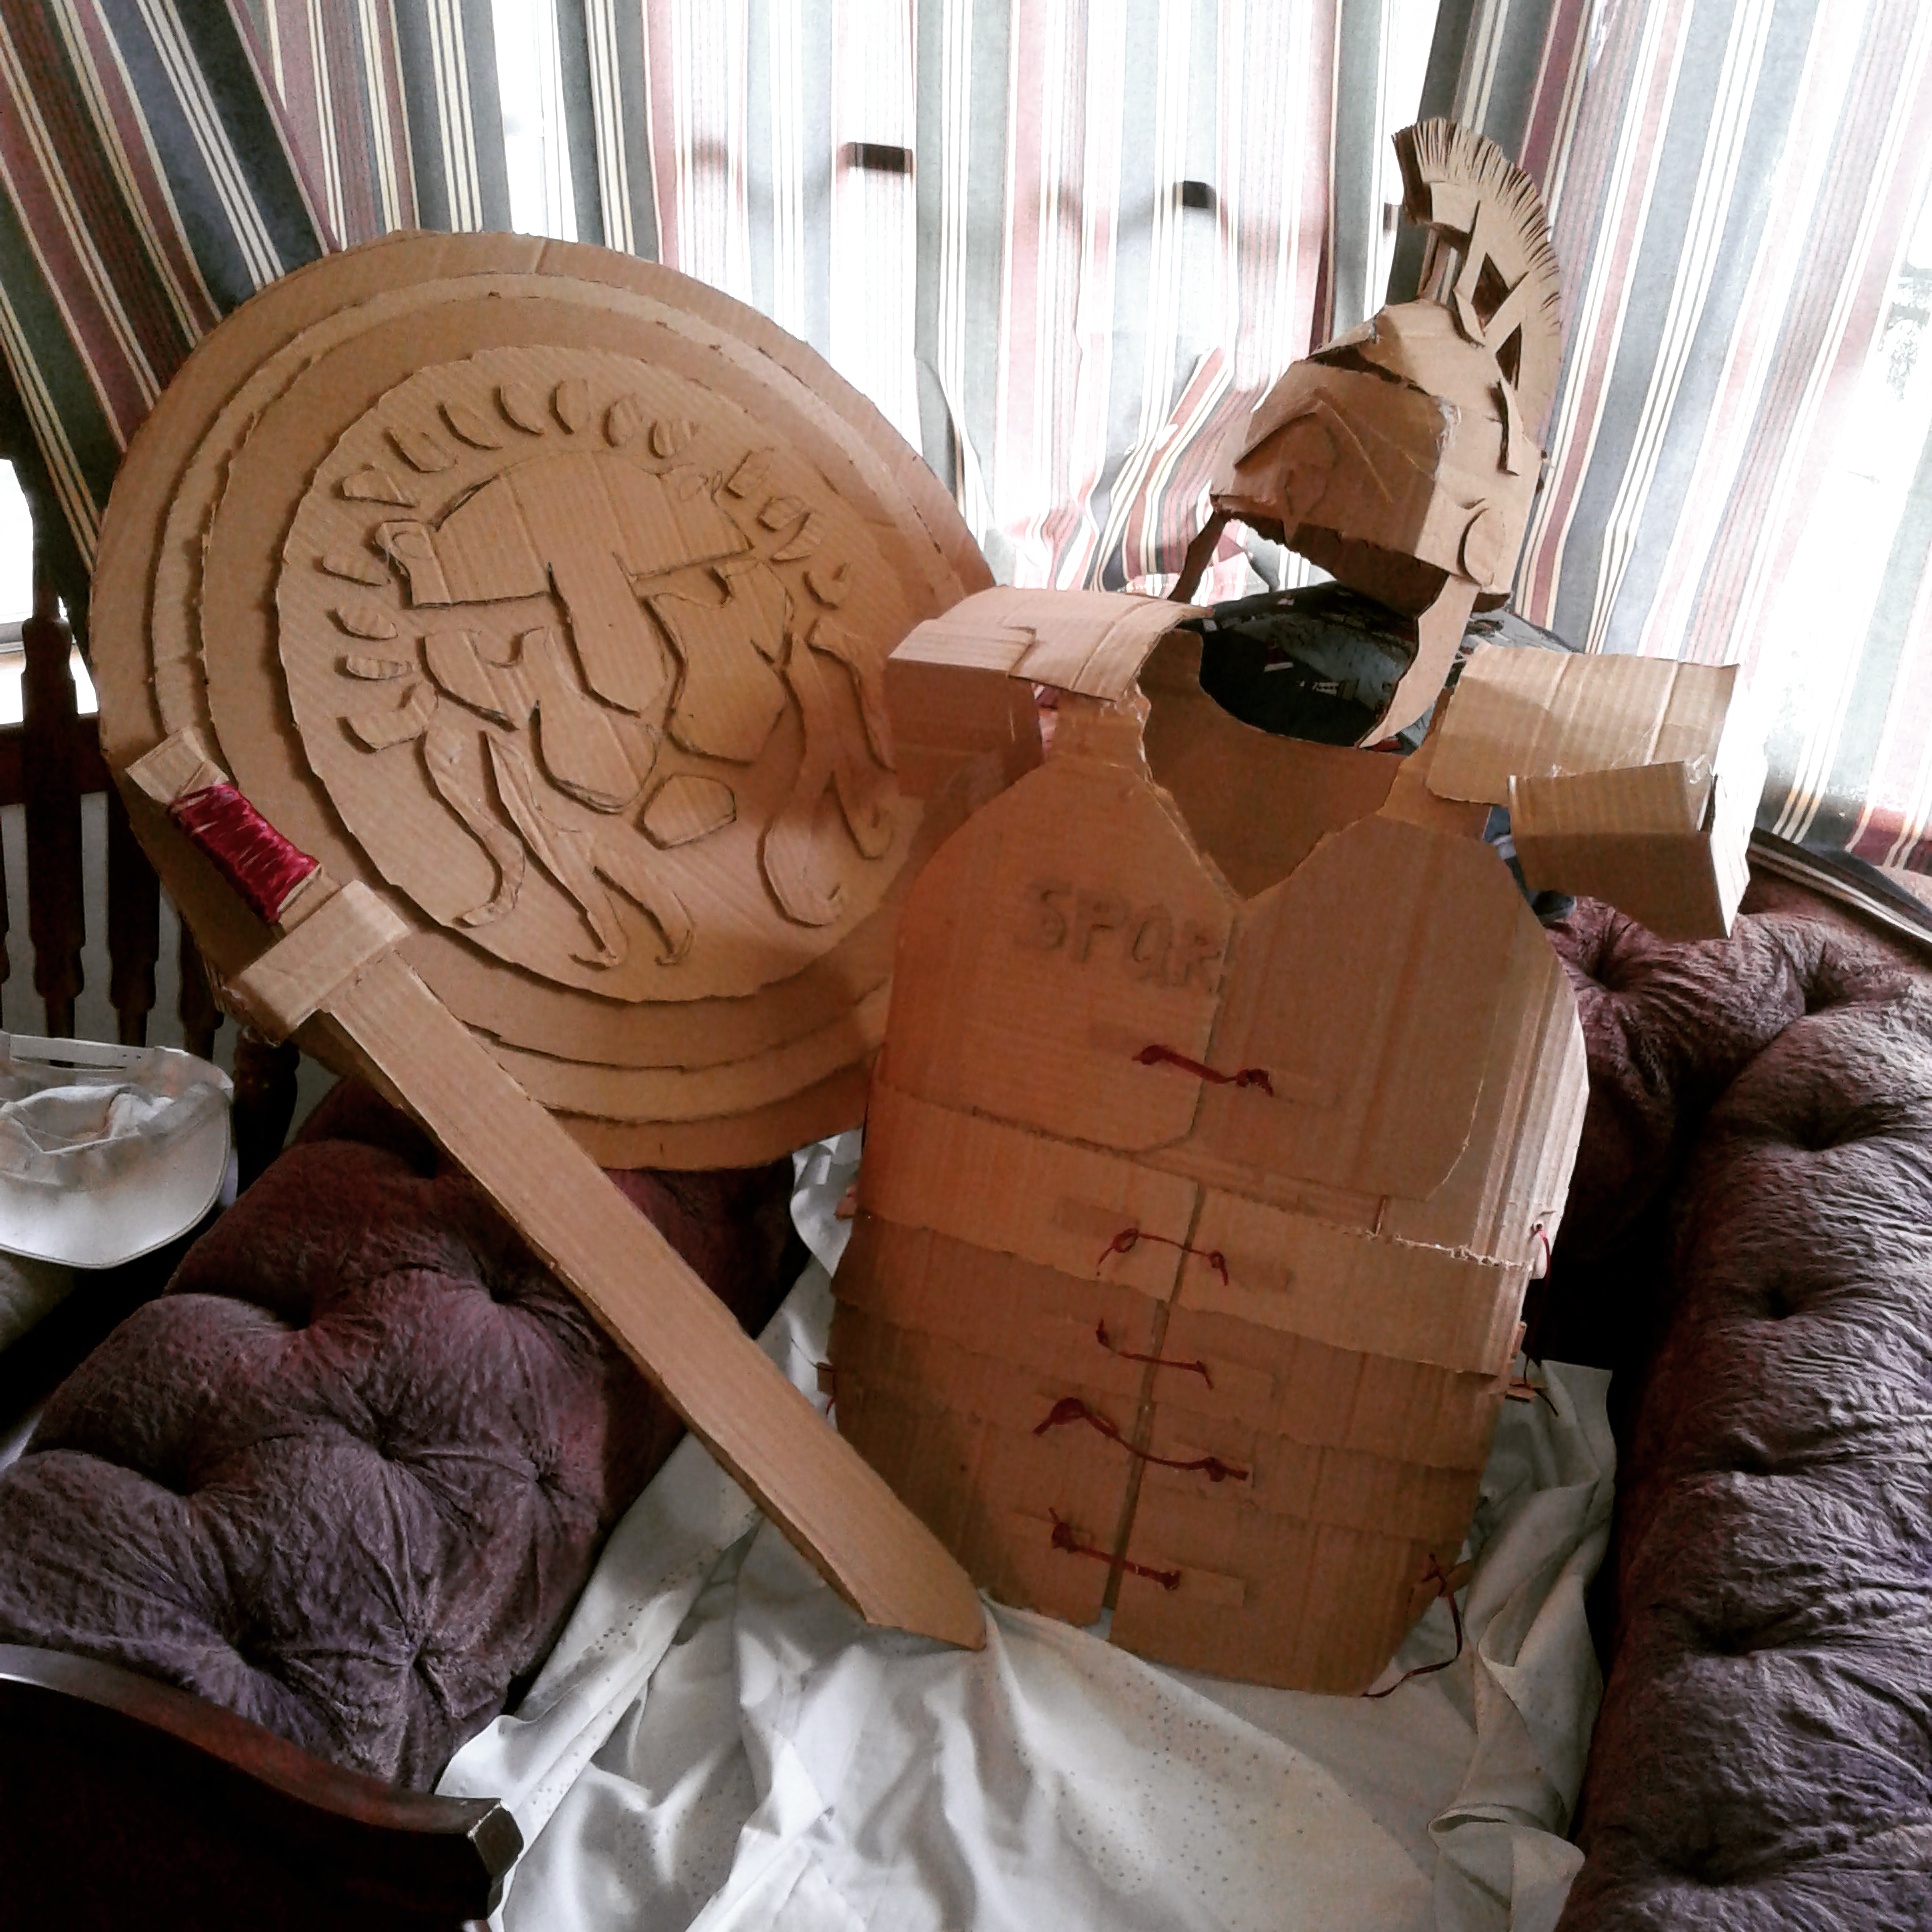 full knight suit of armor made out of cardboard